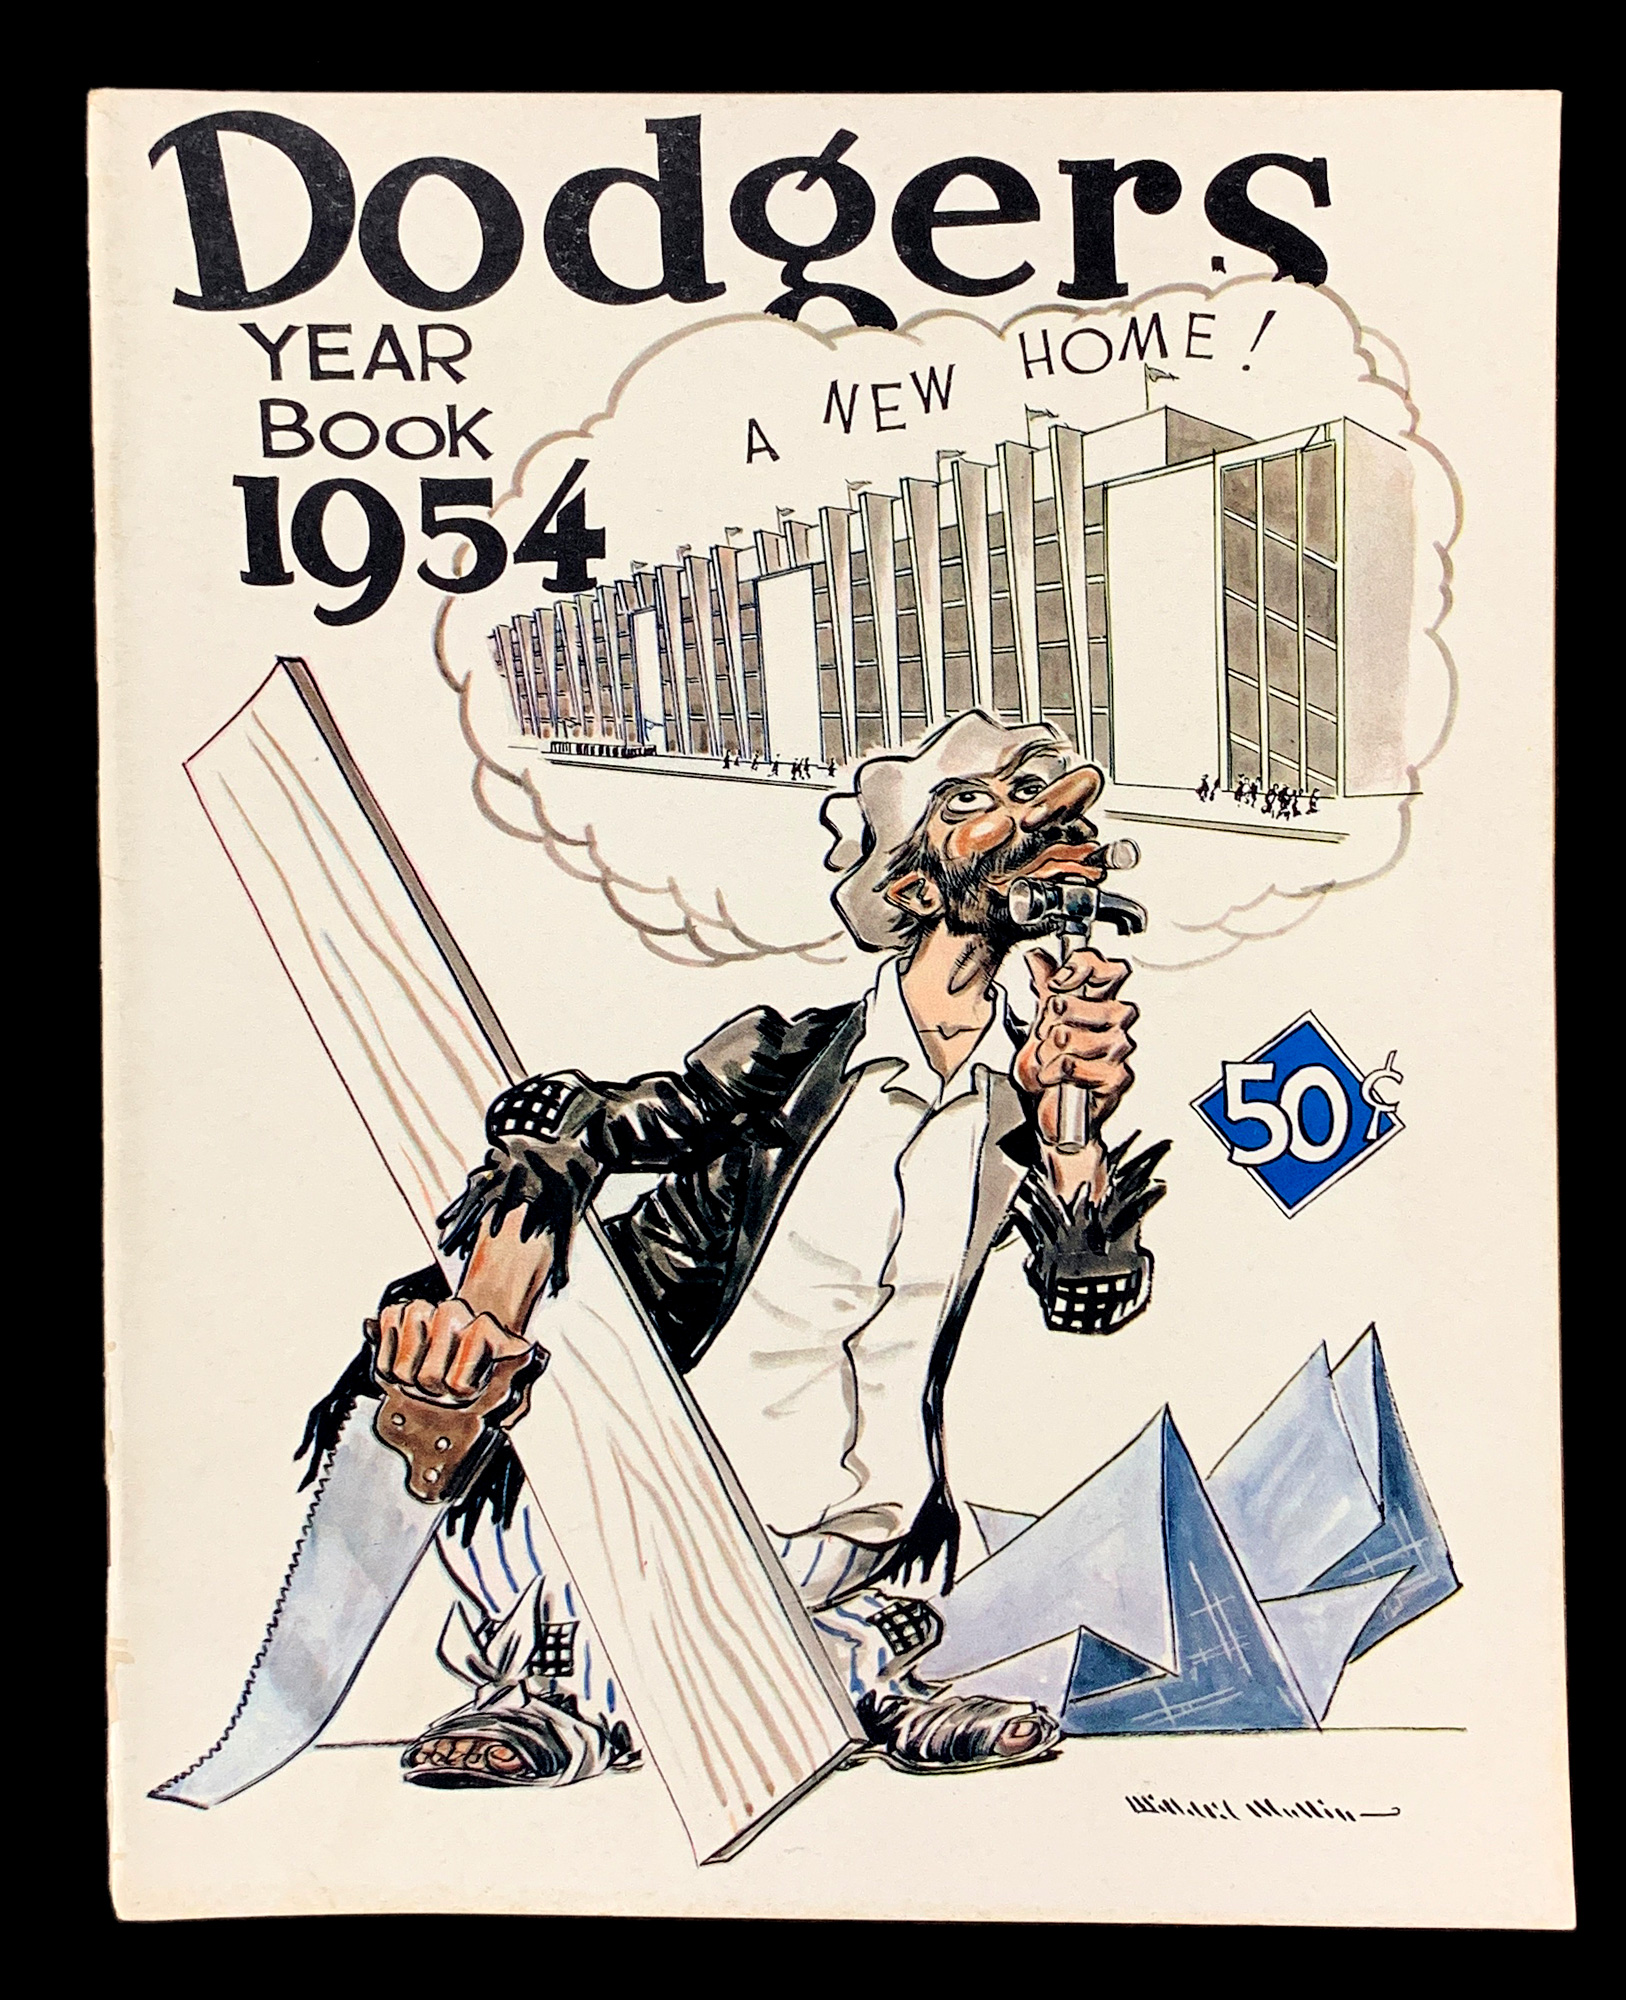 The Dodgers Yearbook has been a - Los Angeles Dodgers